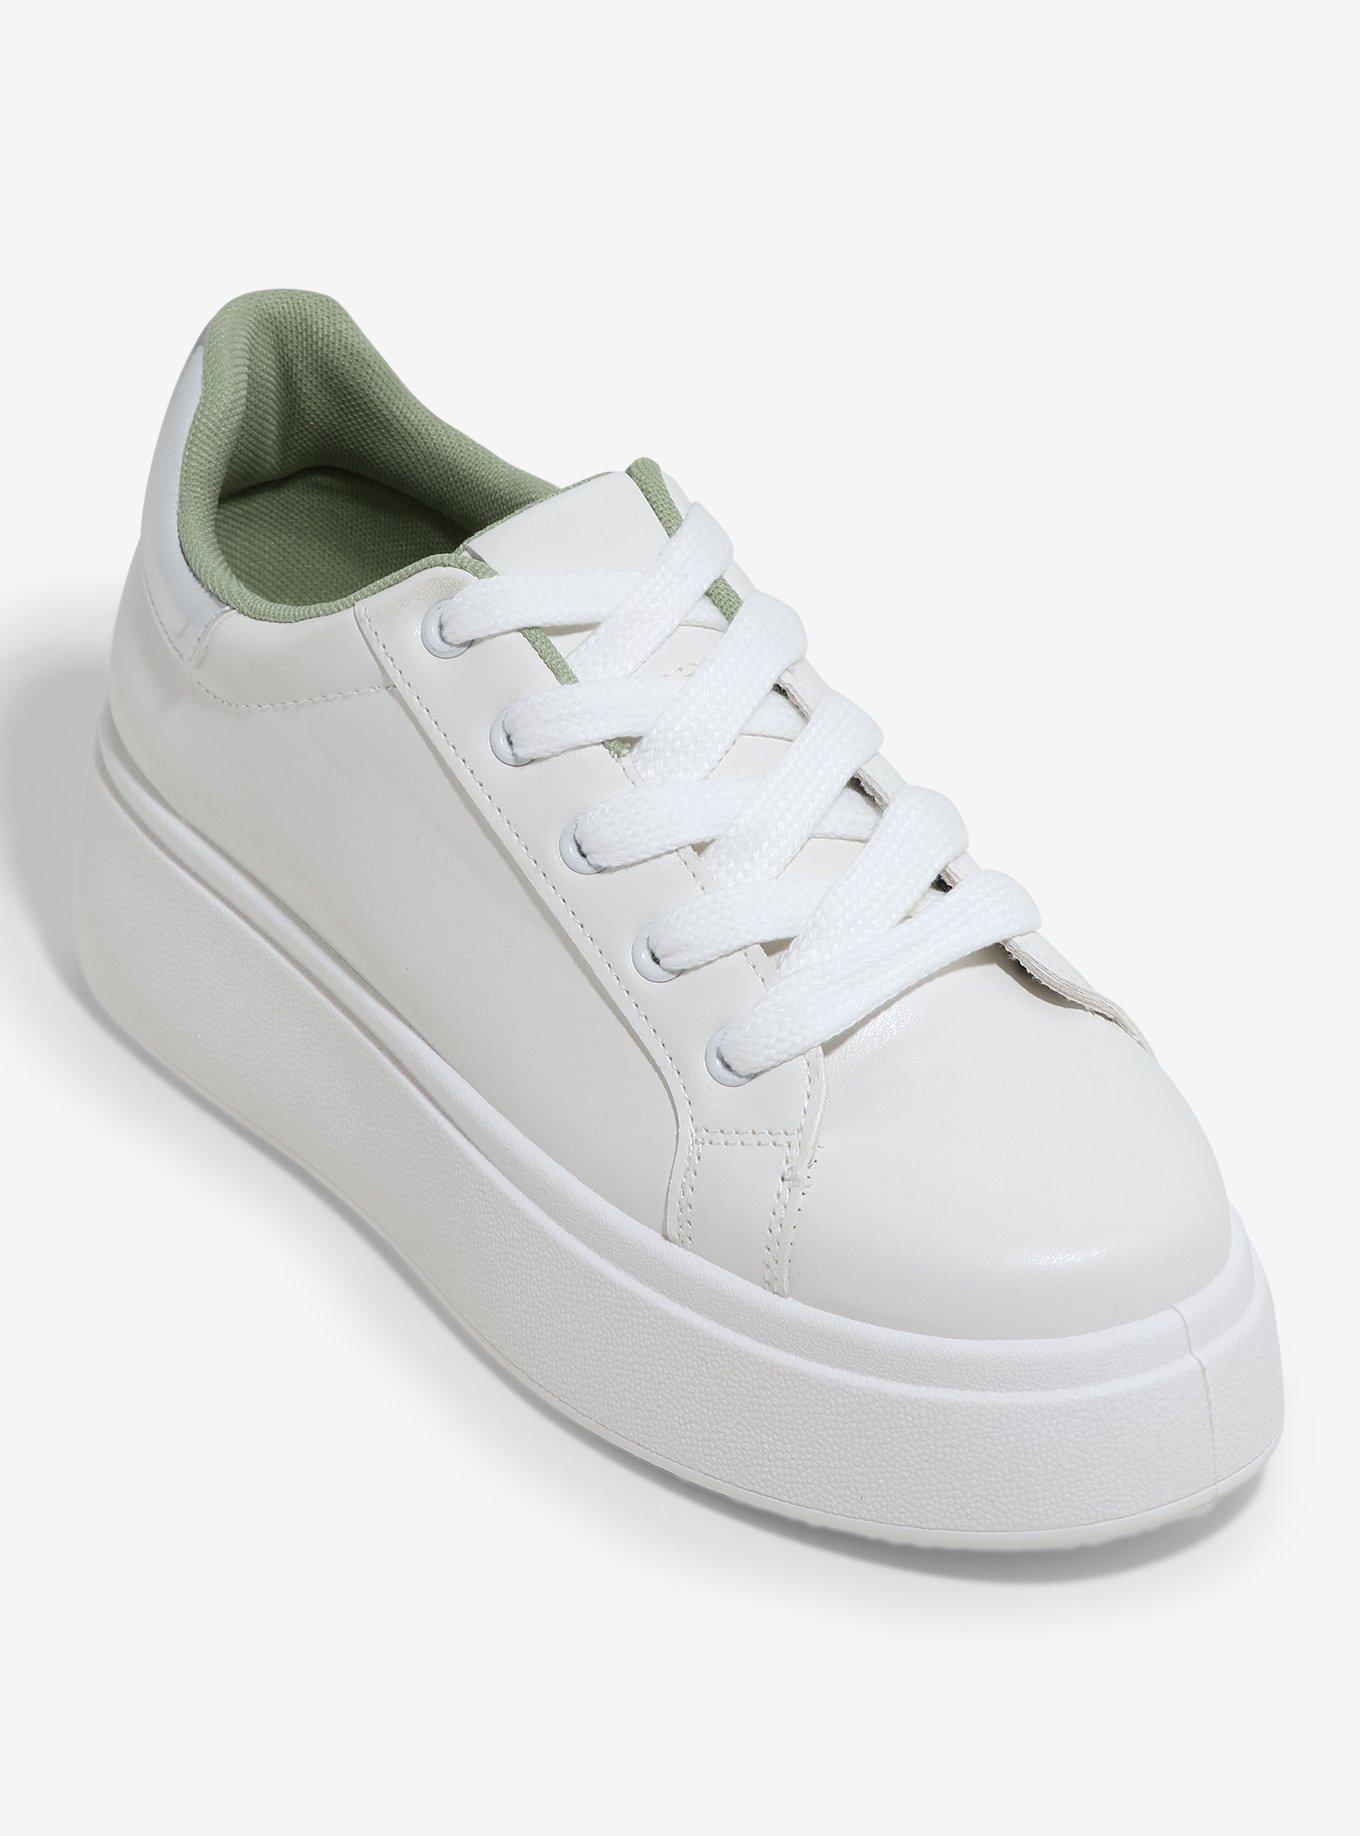 Dirty Laundry White Chunky Sneakers, MULTI, hi-res